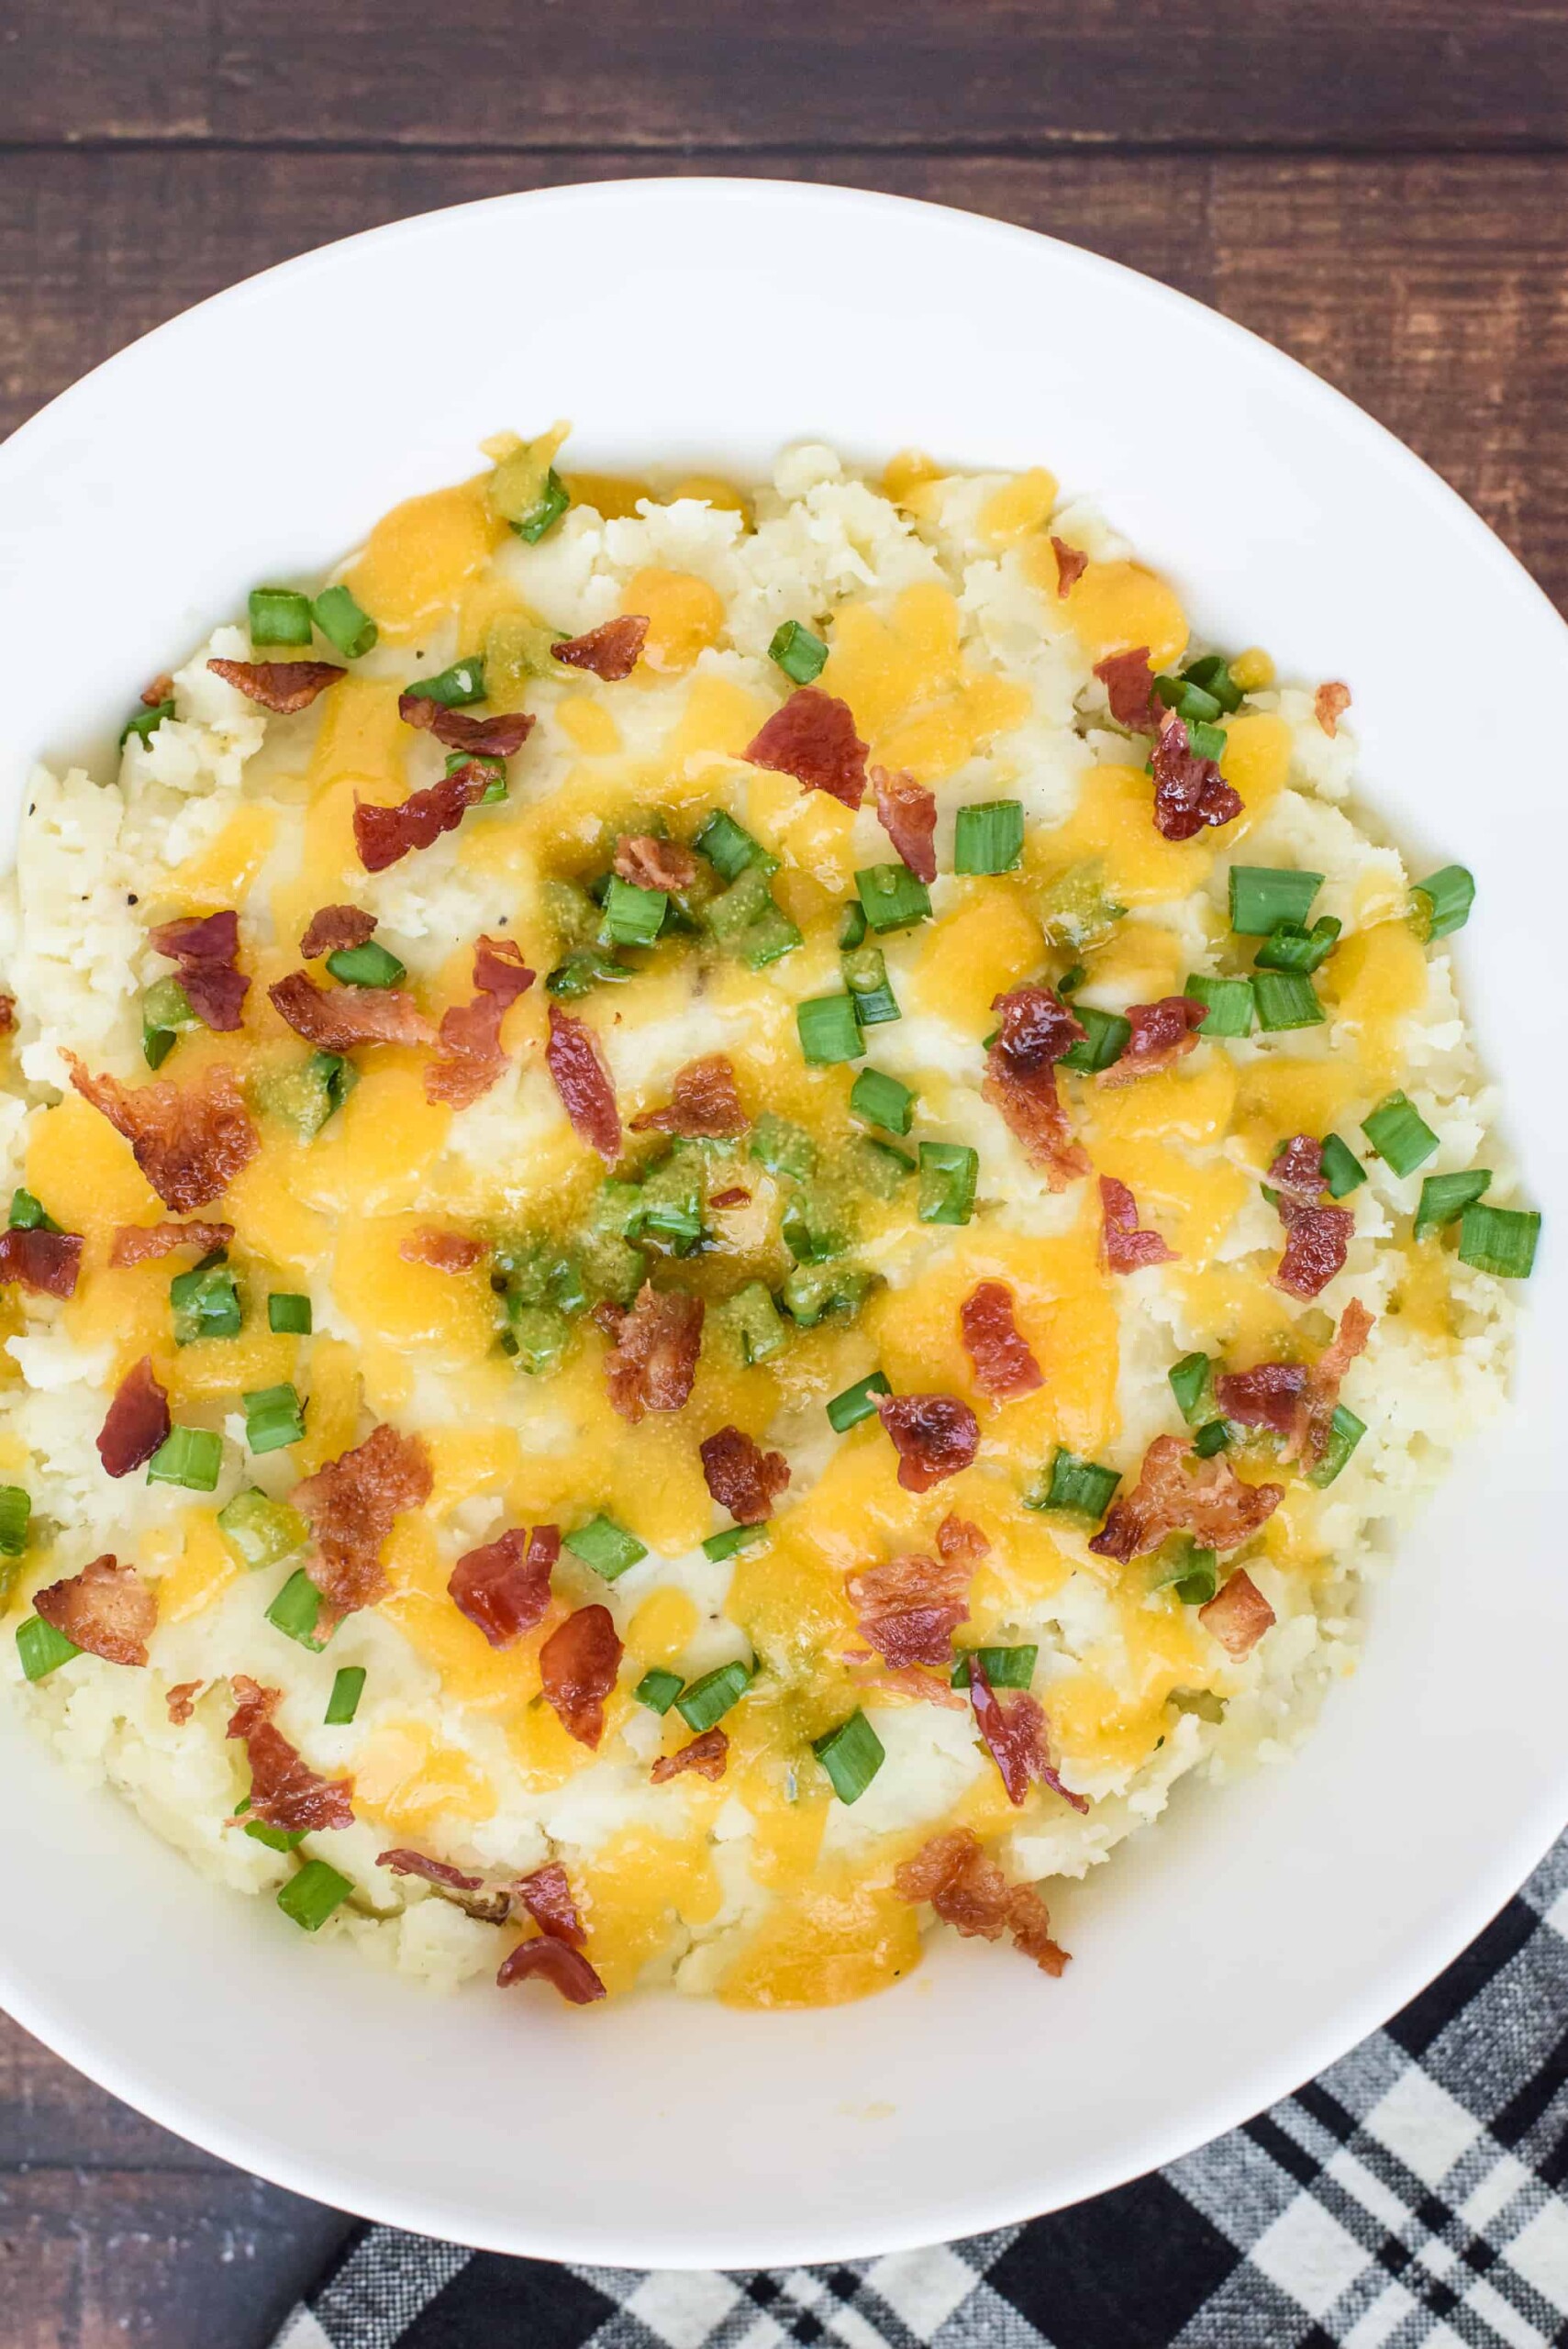 Mashed potatoes served with cheese, onions, and bacon.